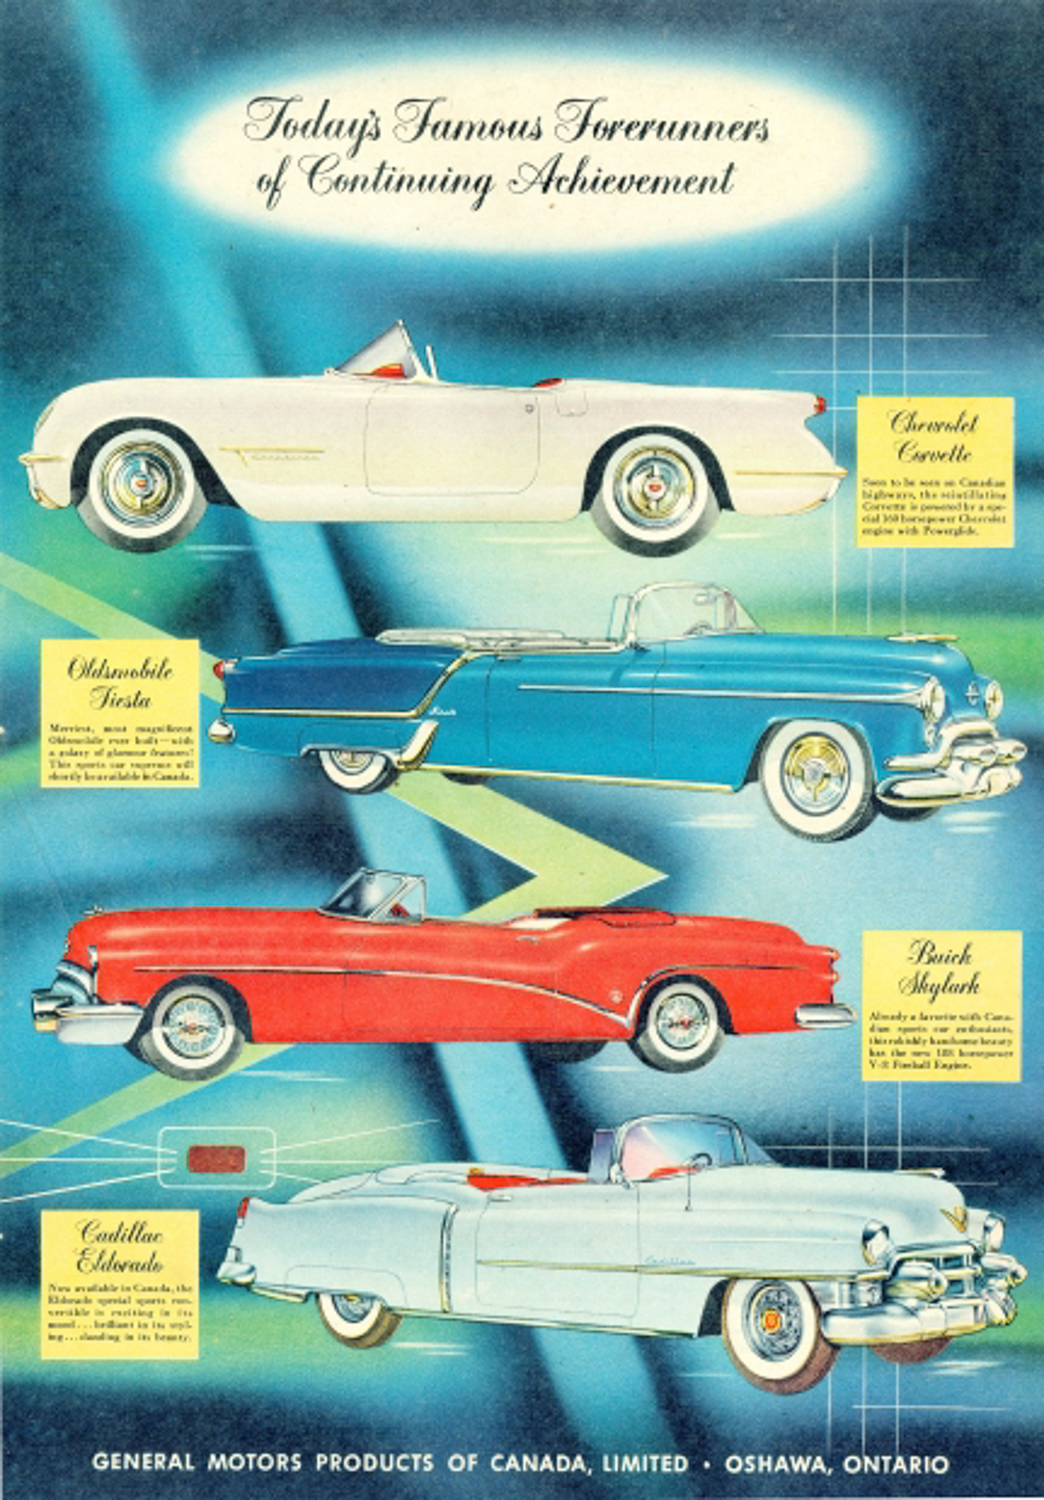 GM's dream cars for 1953 